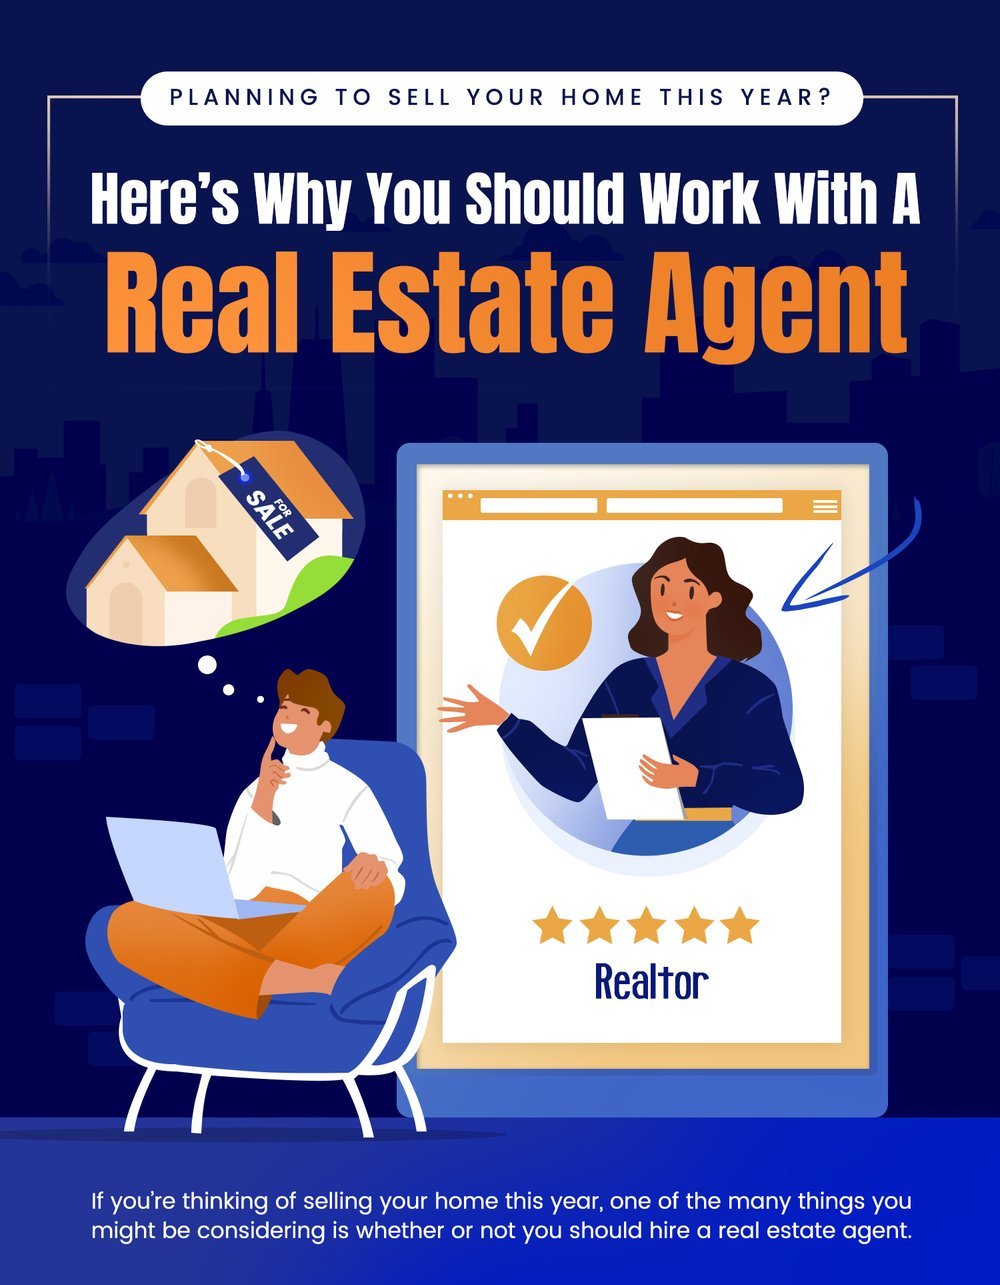 Planning To Sell Your Home This Year? Here's Why You Should Work With A Real Estate Agent